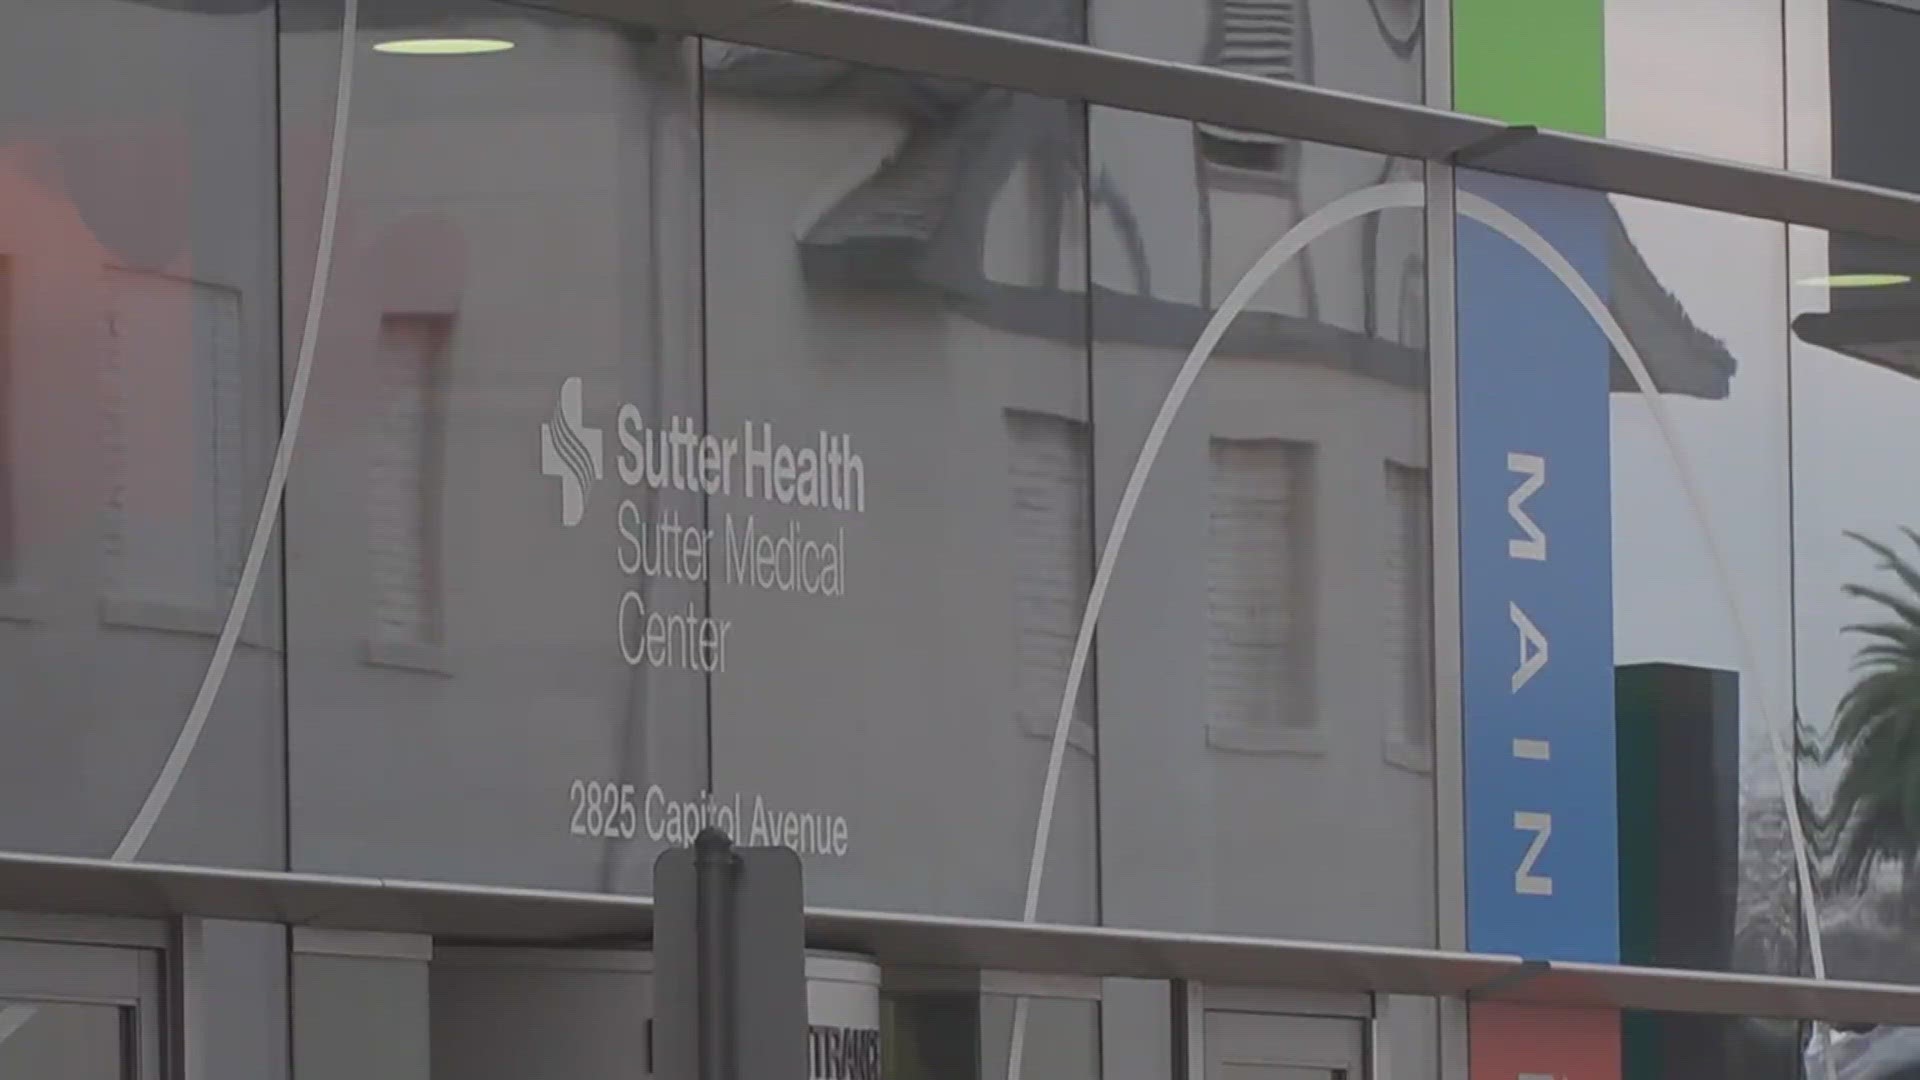 All of the patients impacted have been contacted via letters in the mail, Sutter Health said.